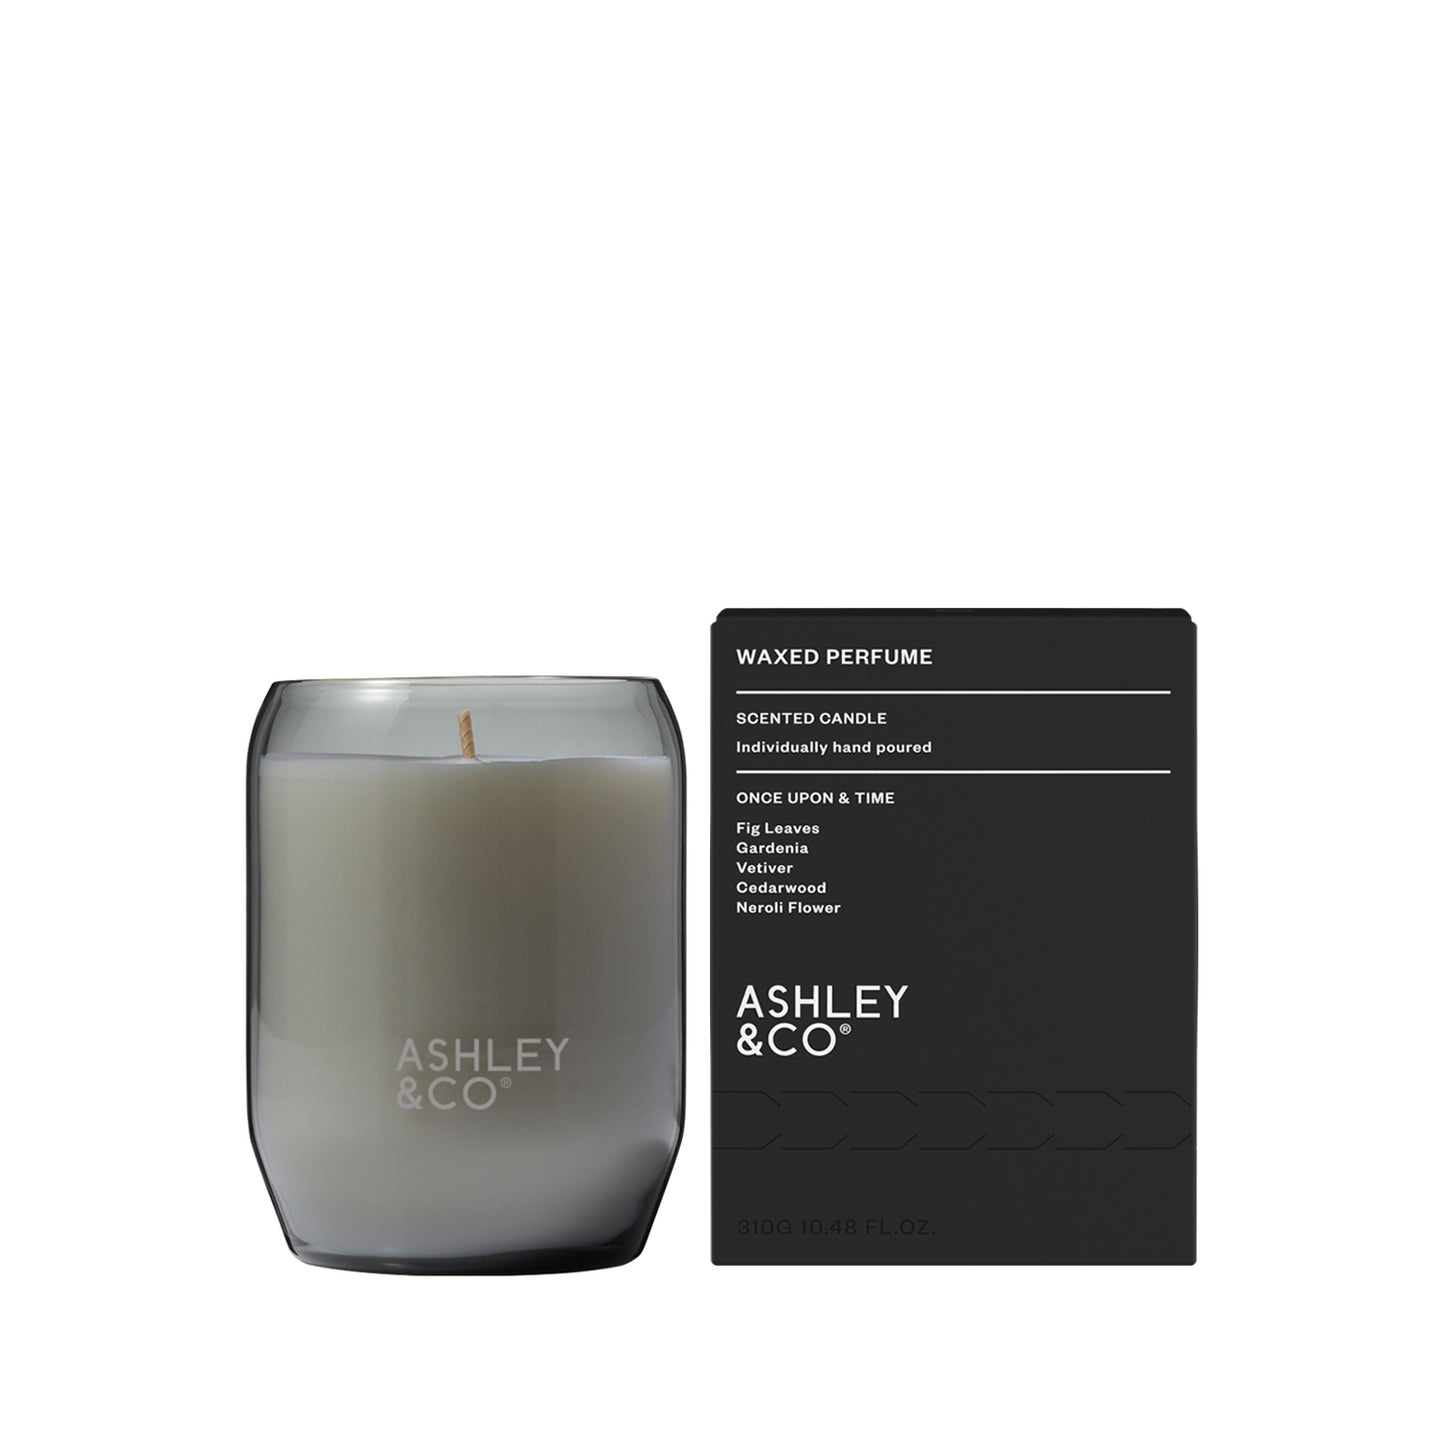 Waxed Perfume - Scented Candle - Once Upon & Time